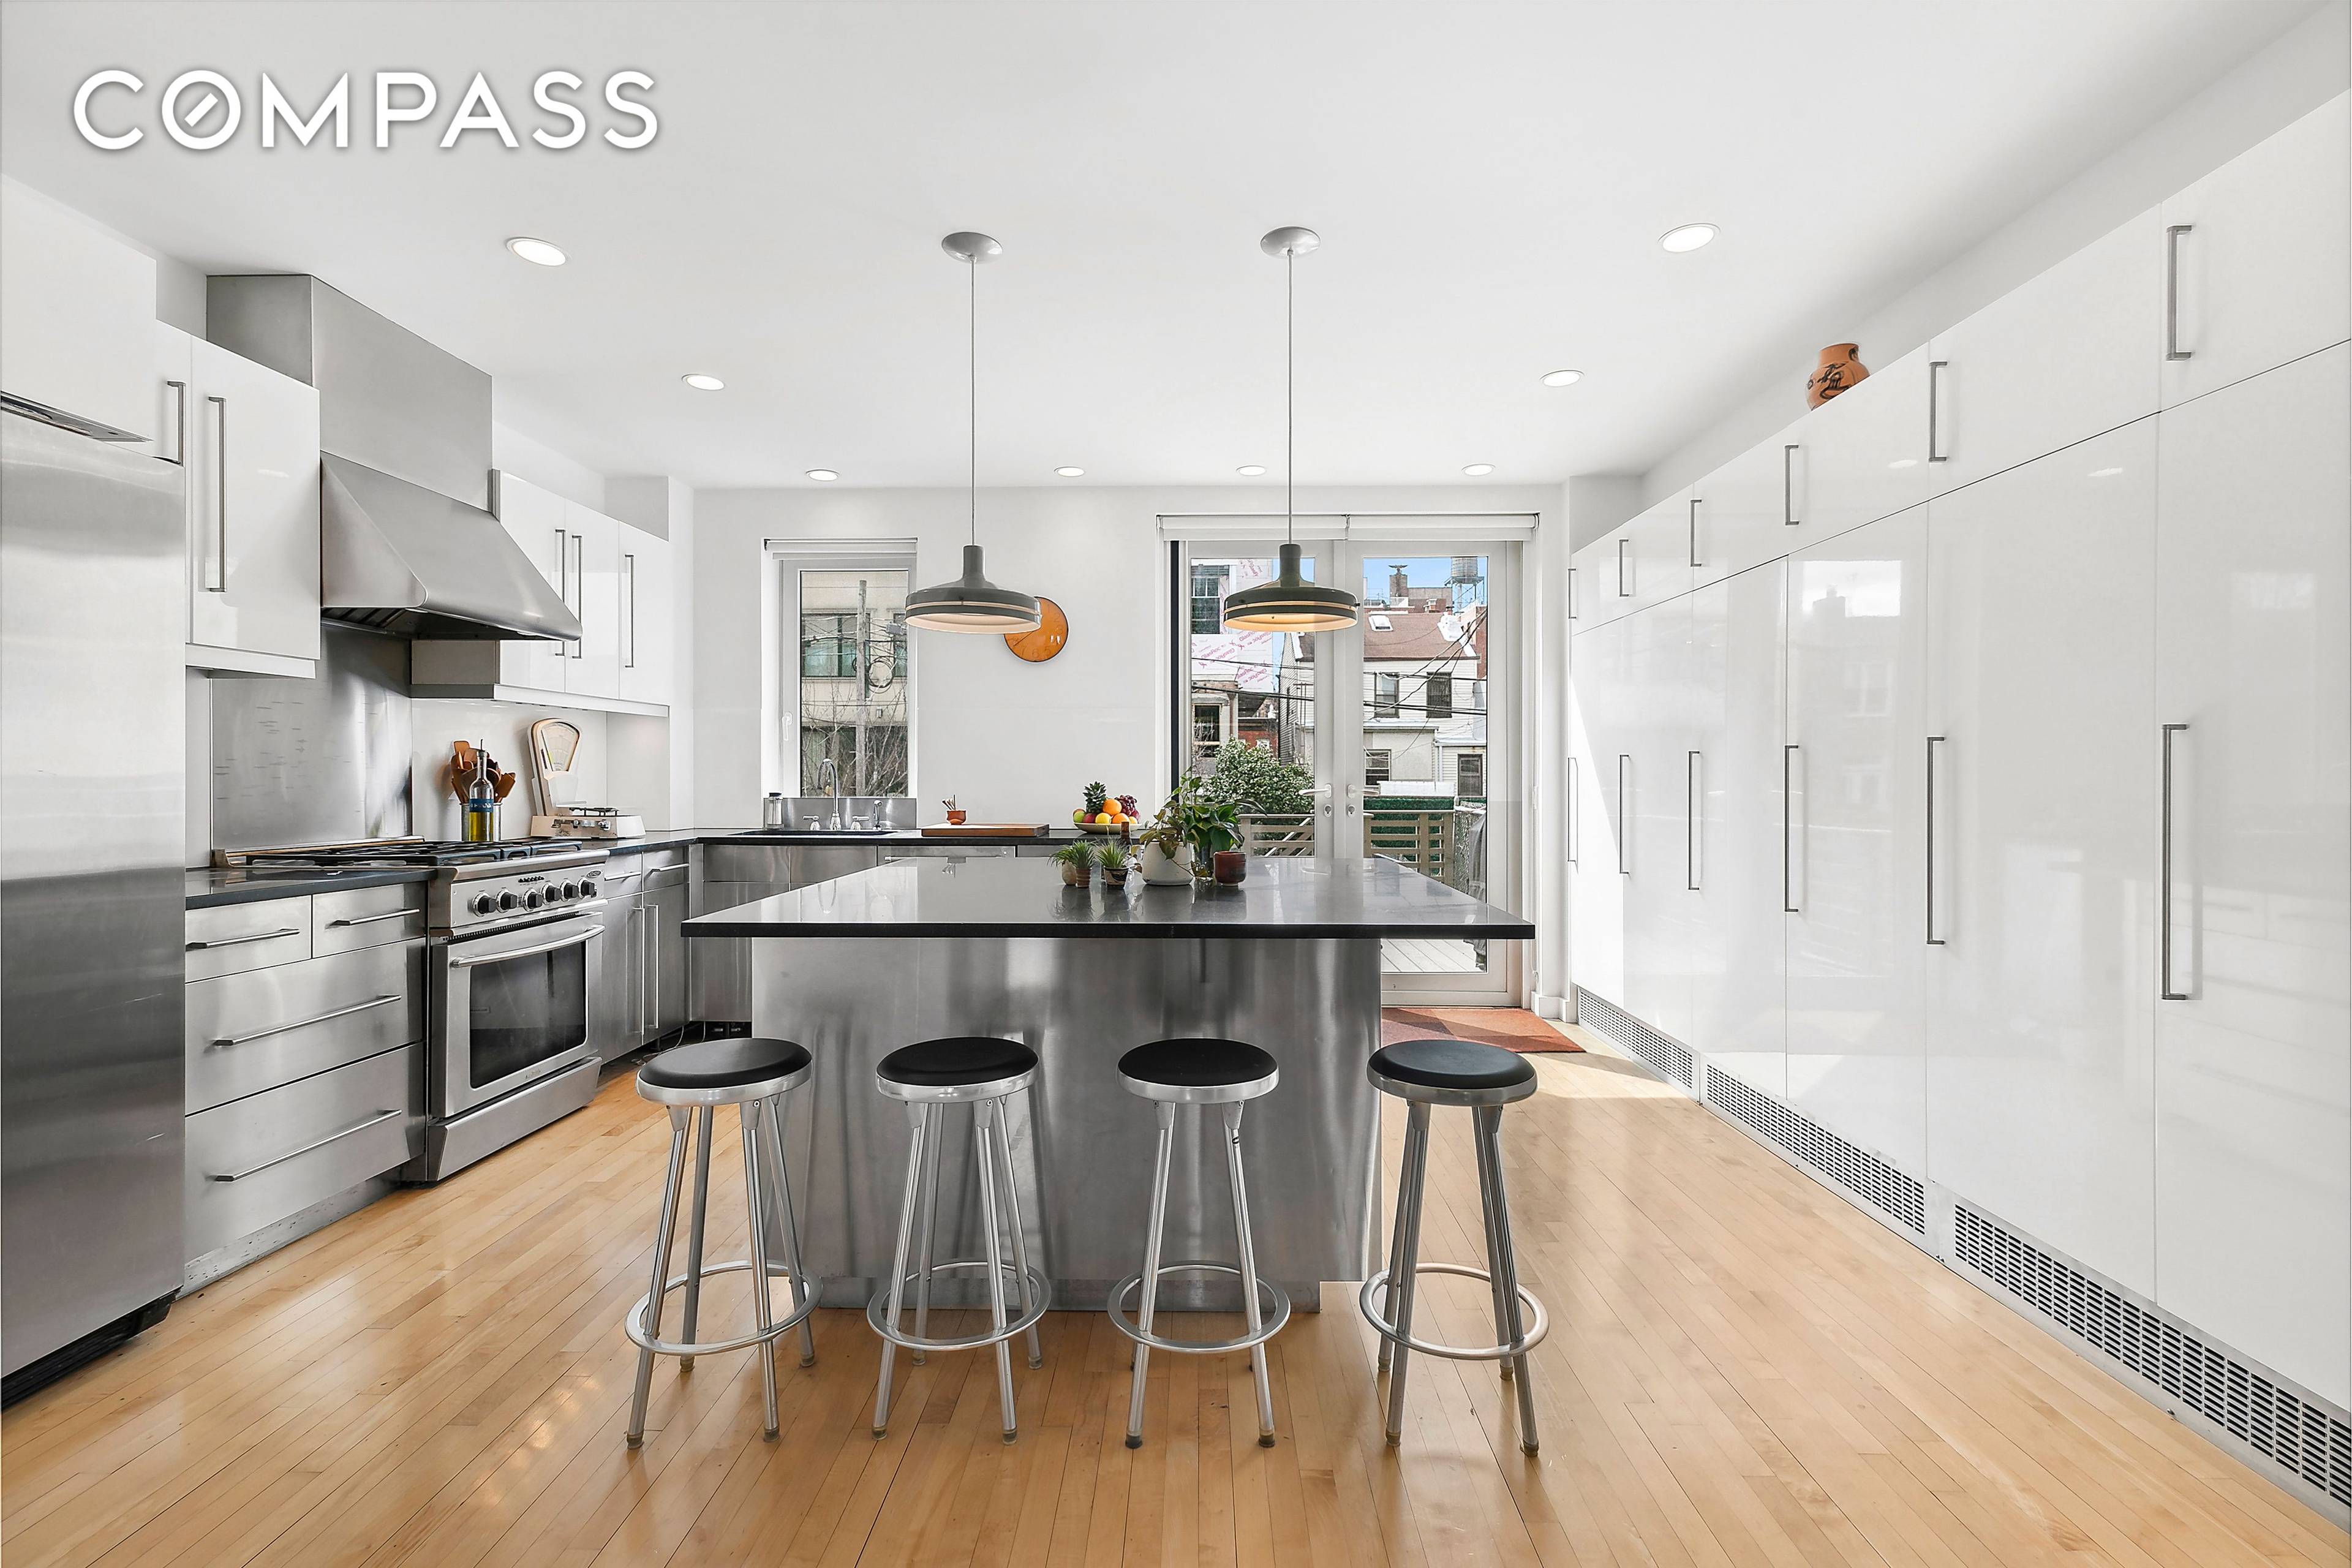 Contemporary Classic. Designed for comfort and easy living, this renovated 2 family townhouse features a beautiful and spacious 4 bedroom owner's duplex, over a charming one bedroom garden rental.